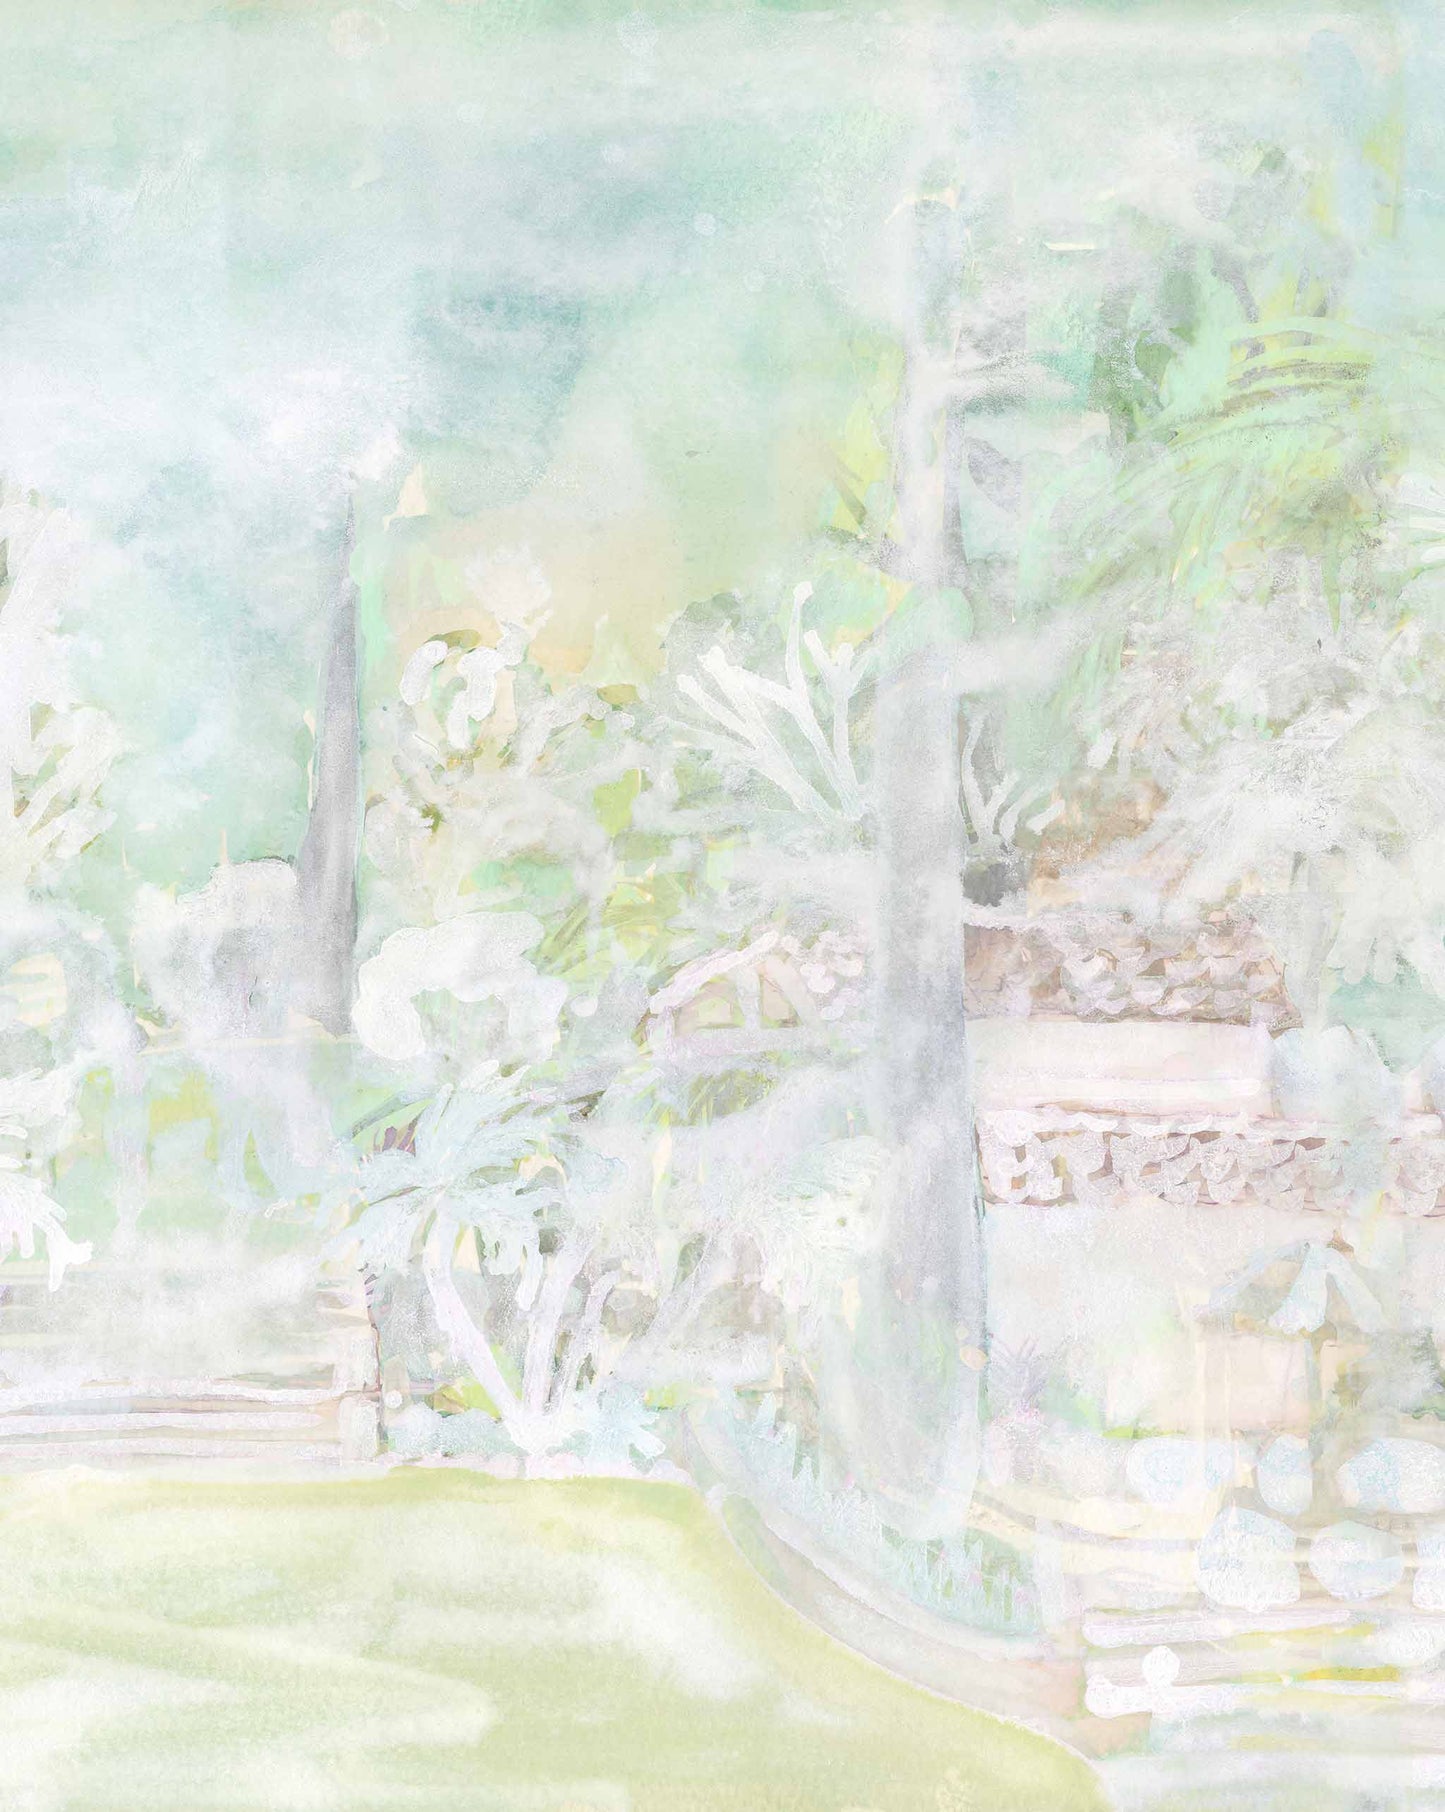 A soft watercolor painting of Regalo di Dio Wallpaper Mural||Luminosa with lush greenery and pastel tones, depicting trees, shrubs, and a hint of a pathway.